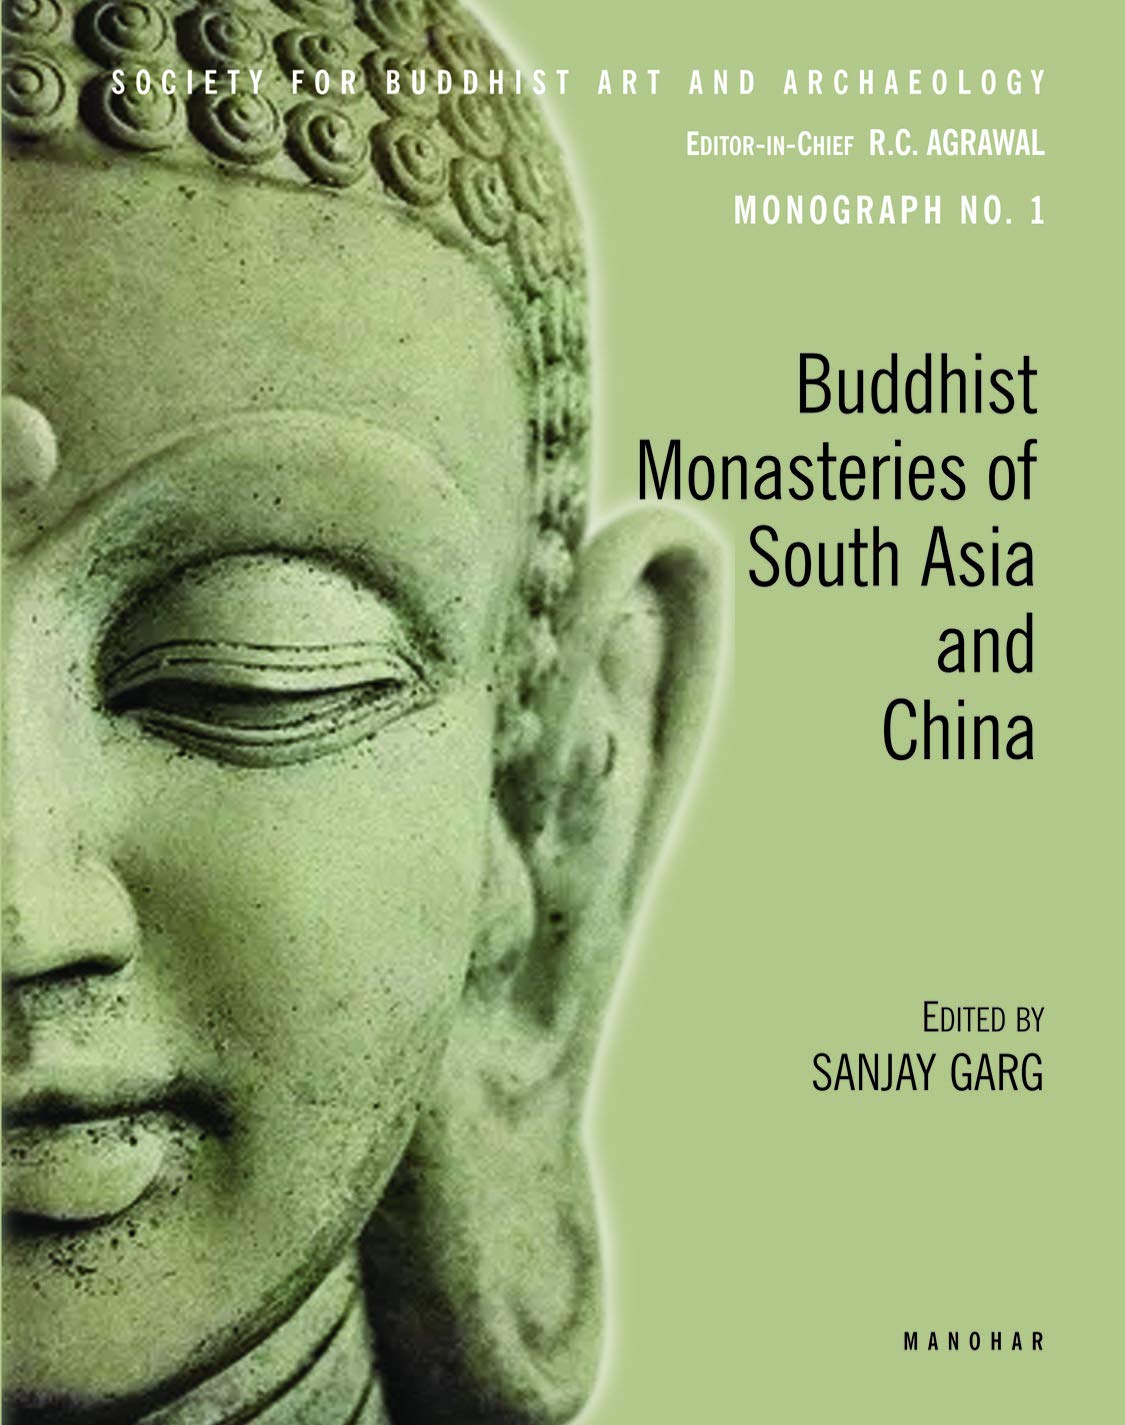 BUDDHIST MONASTERIES OF SOUTH ASIA AND CHINA